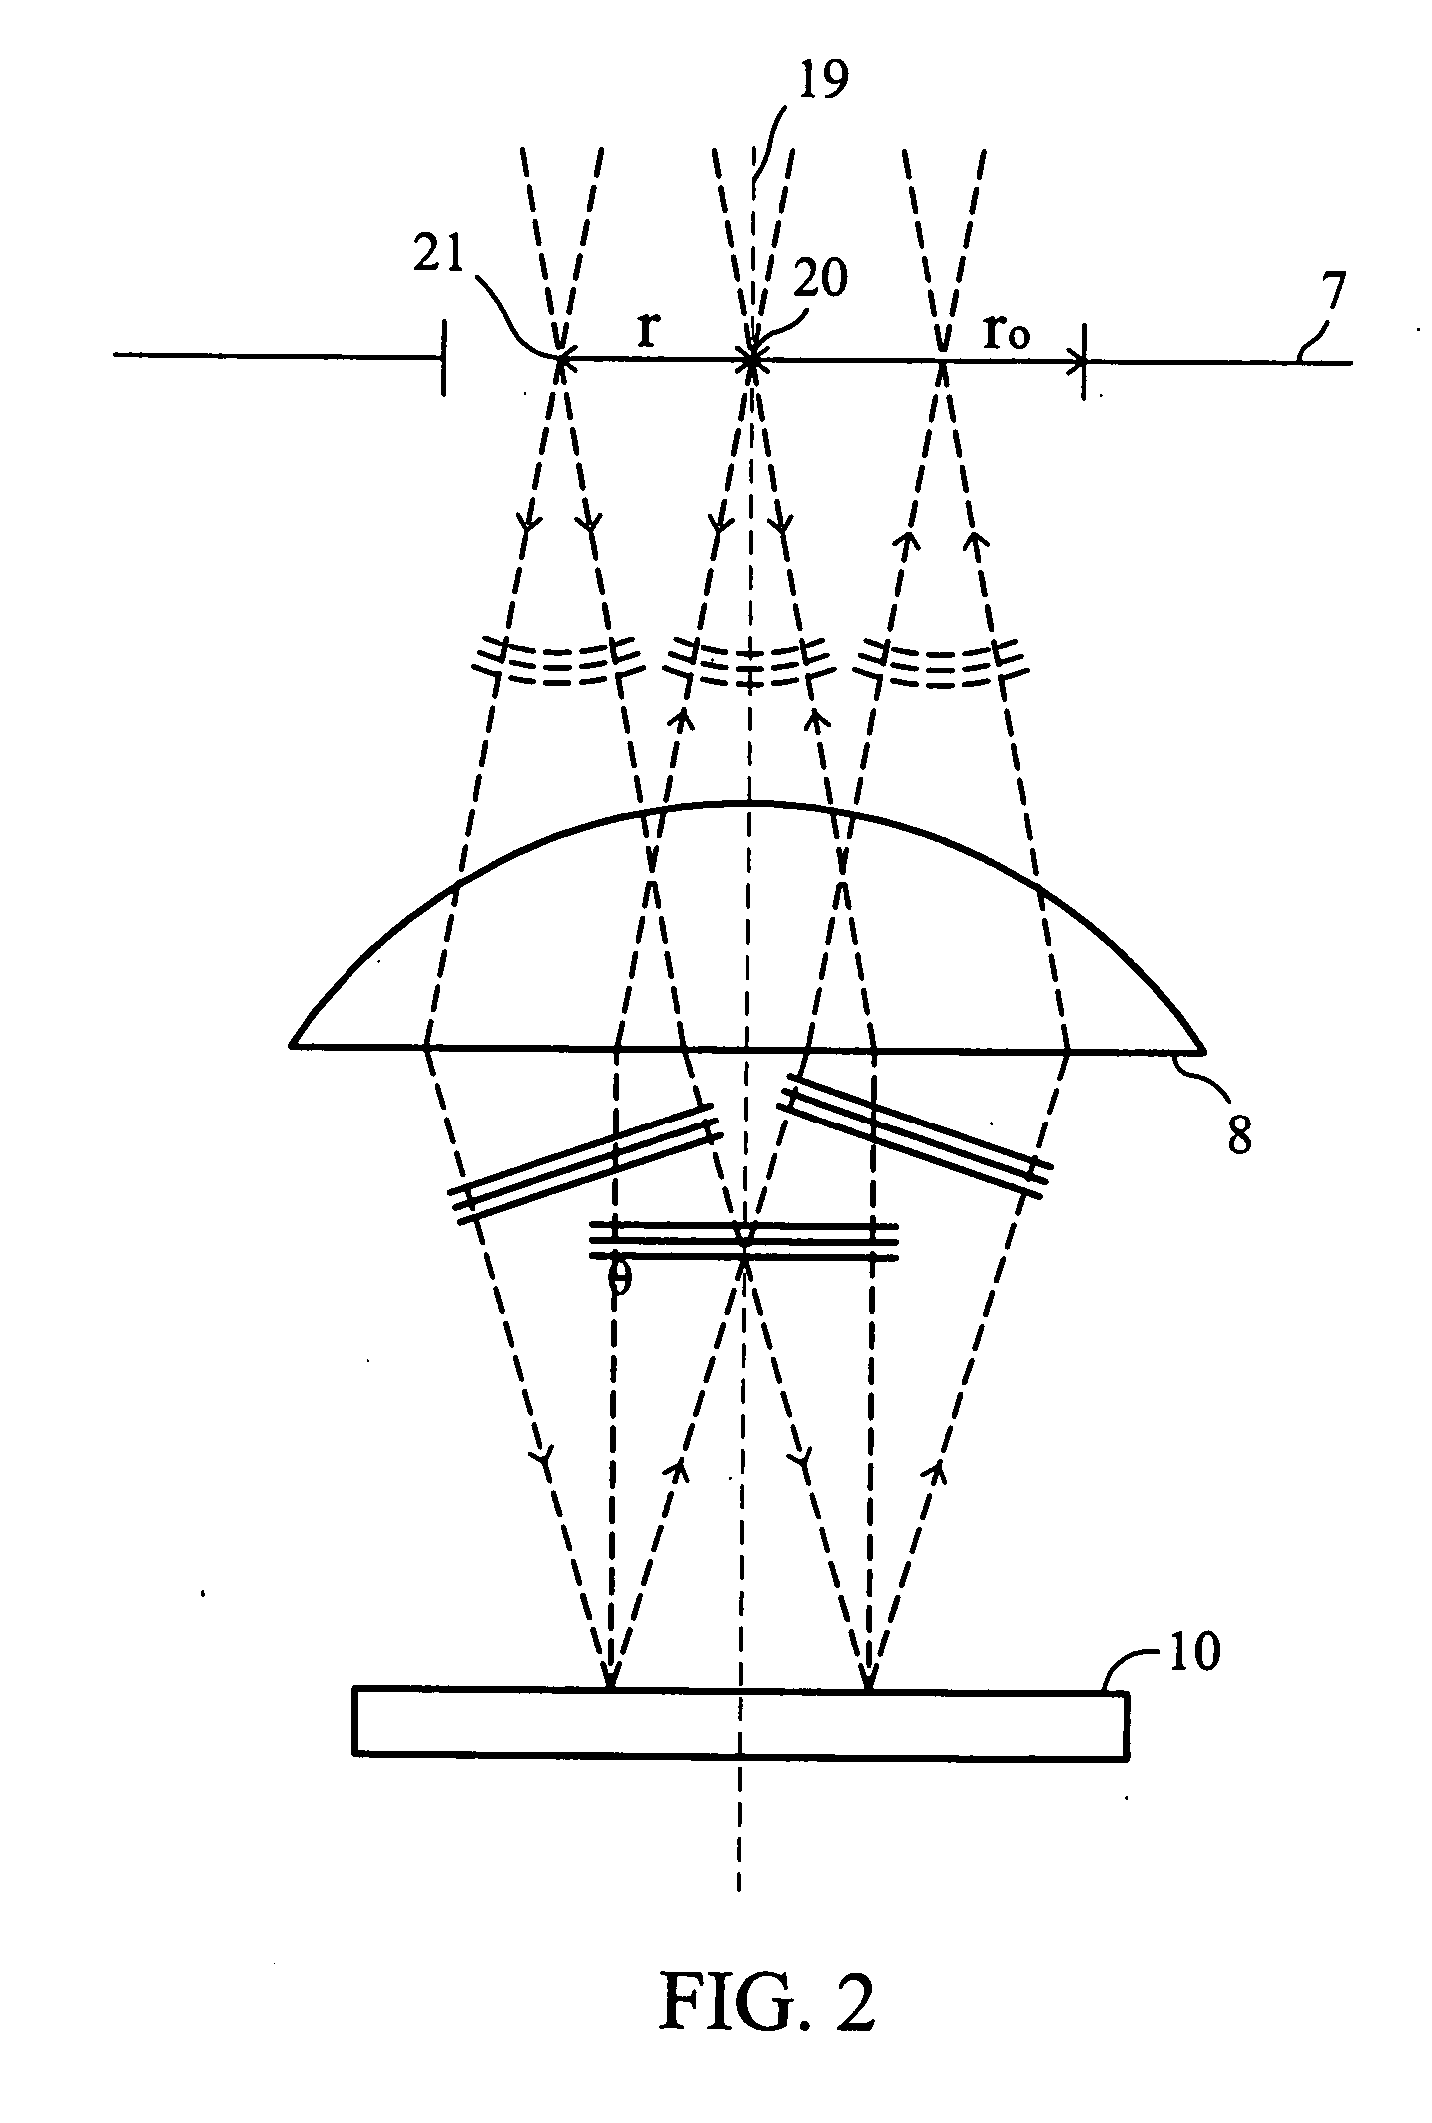 Method & apparatus for optically analyzing a surface